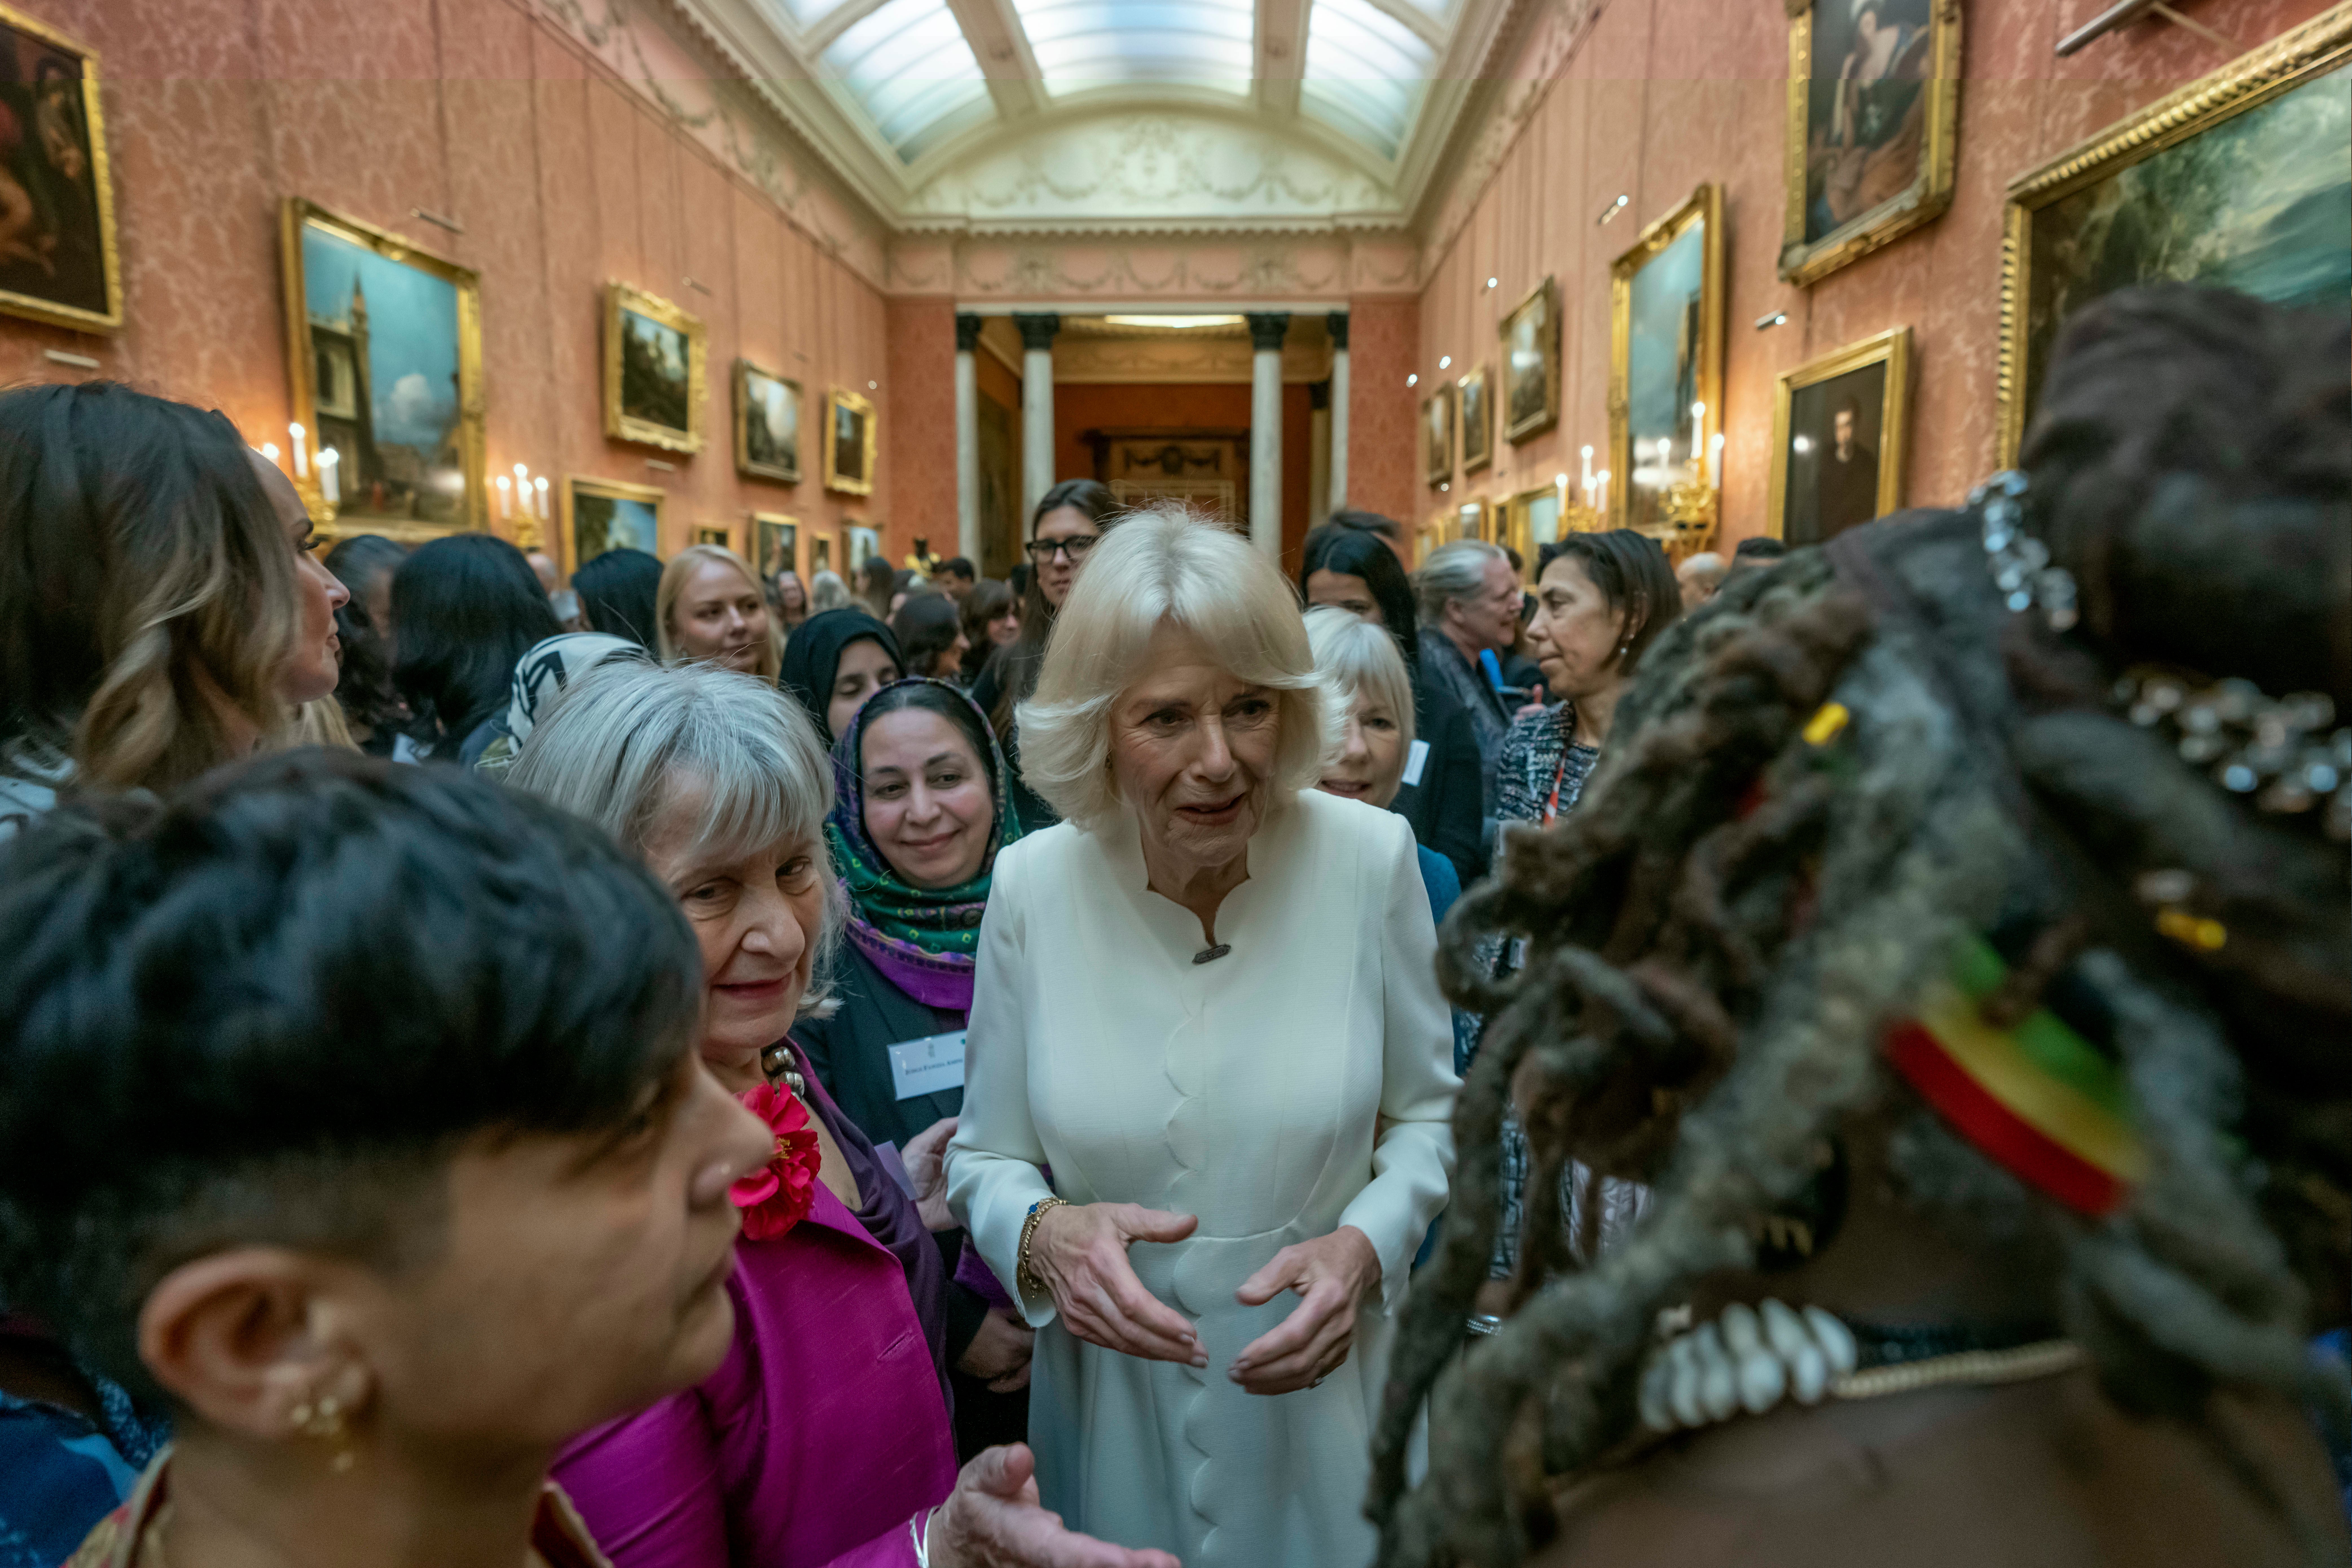 Ms Fulani was attending the event hosted by Queen Consort Camilla